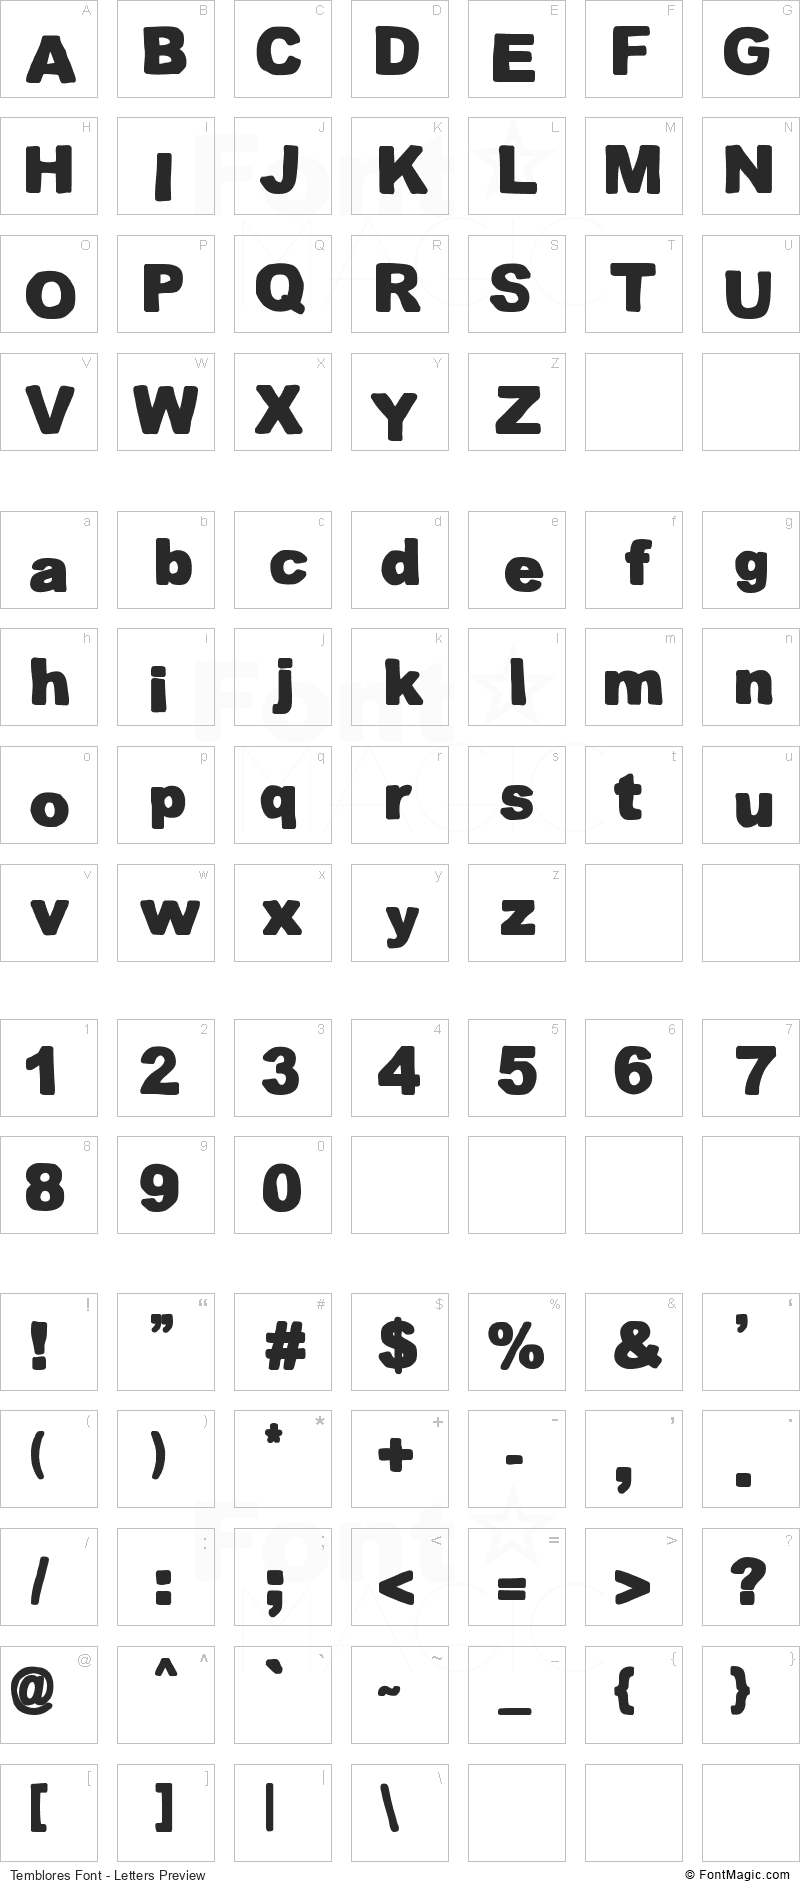 Temblores Font - All Latters Preview Chart